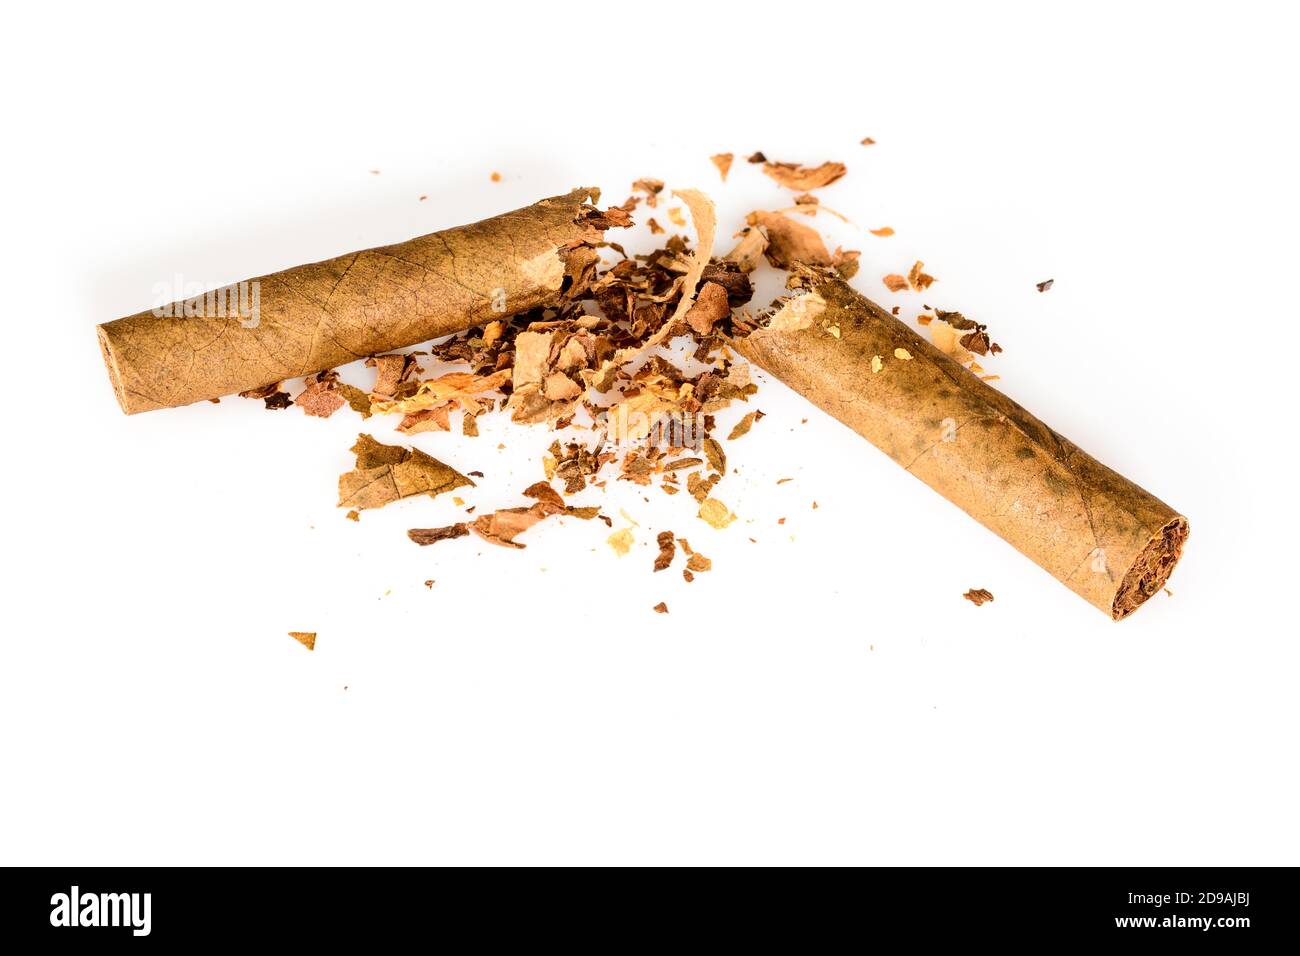 Broken tobacco cigarillo as a concept of quitting smoking. World No Tobacco Day. Isolated on white background, close up high resolution. Stock Photo